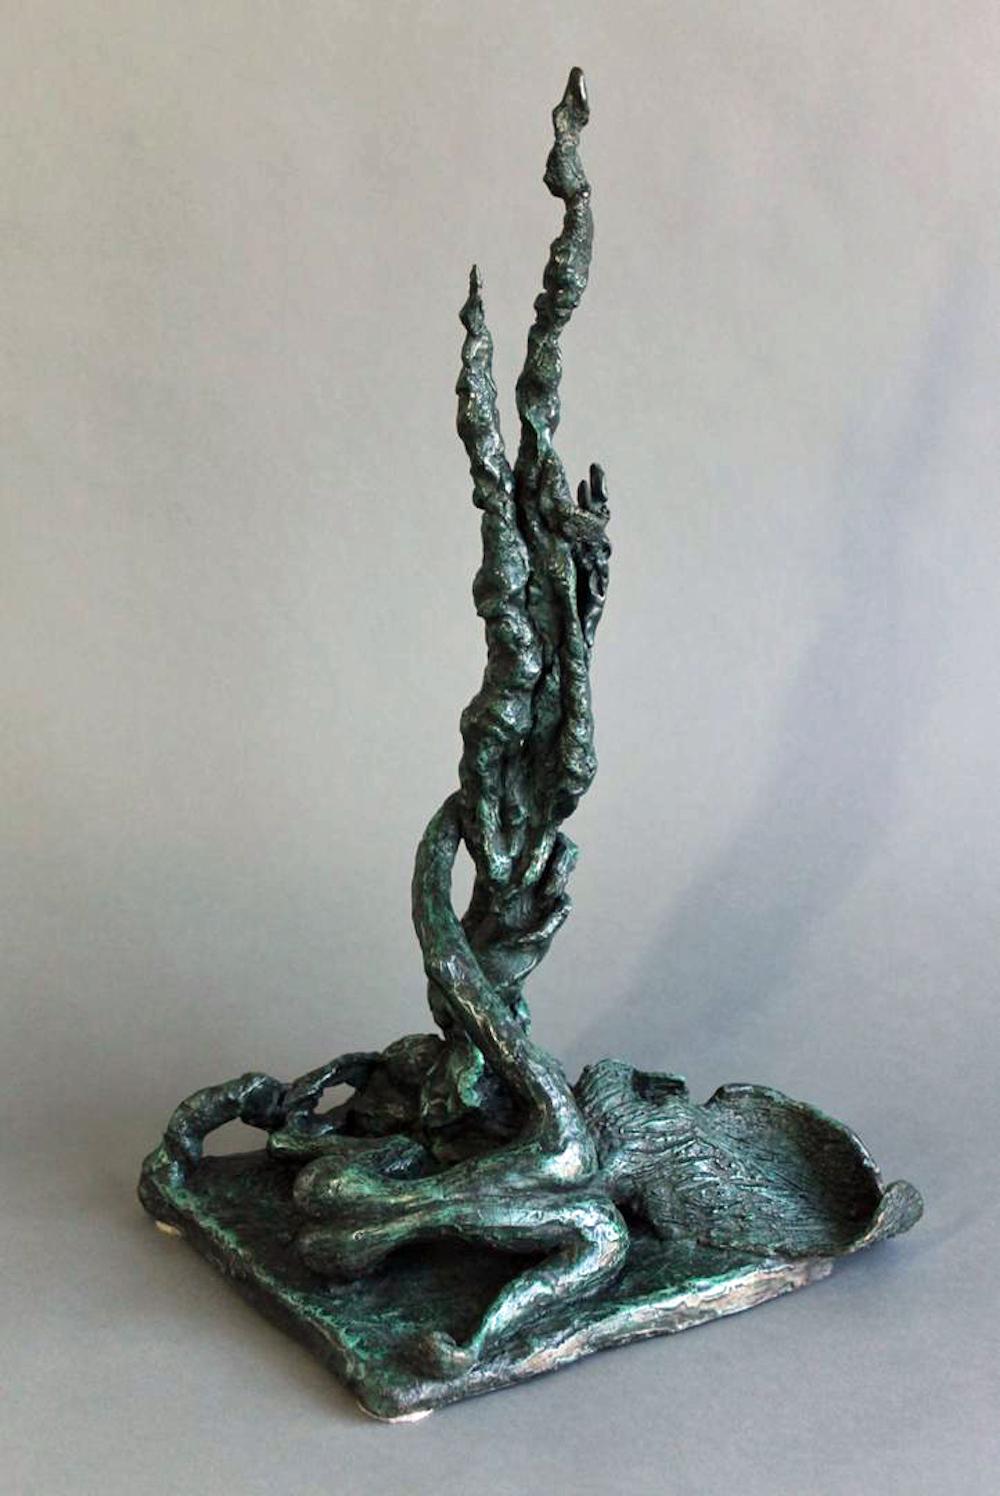 Organic, abstract bronze sculpture by Yulla Lipchitz of a woman lying down with a tree. 

About this artist: Yulla Lipchitz, née Halberstadt, was born on April 21, 1911 in Berlin, Germany. While growing up in a strict, Jewish Orthodox family, she